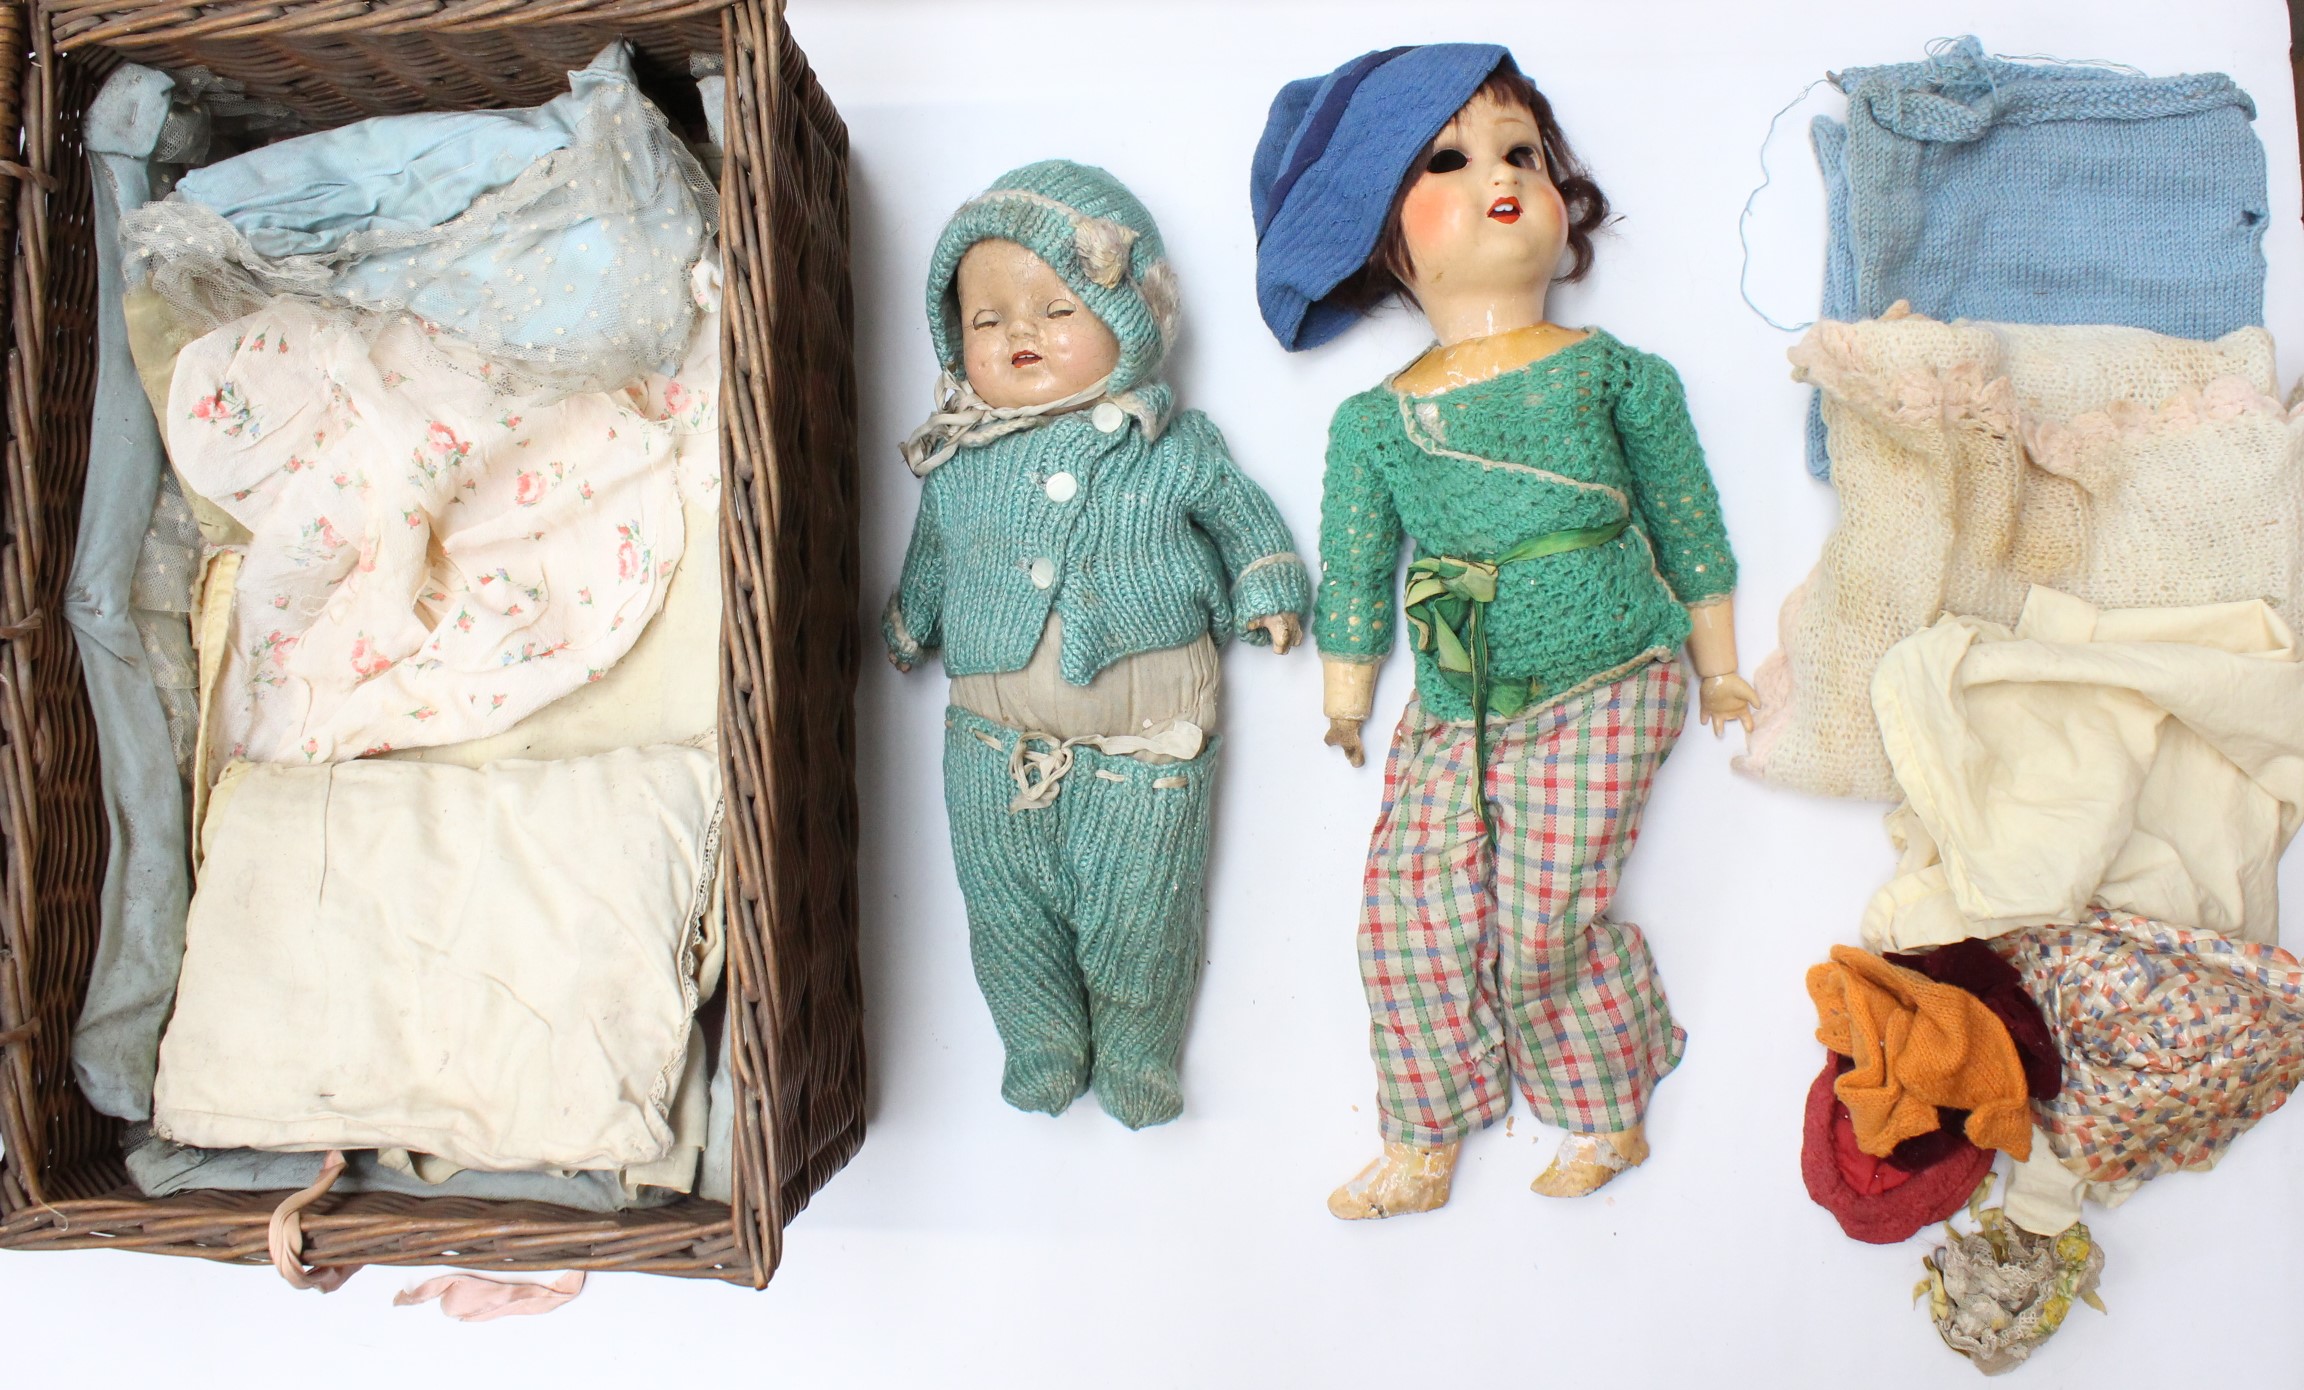 Dolls: A pair of composition dolls with assorted clothing and accessories. Dolls have sustained